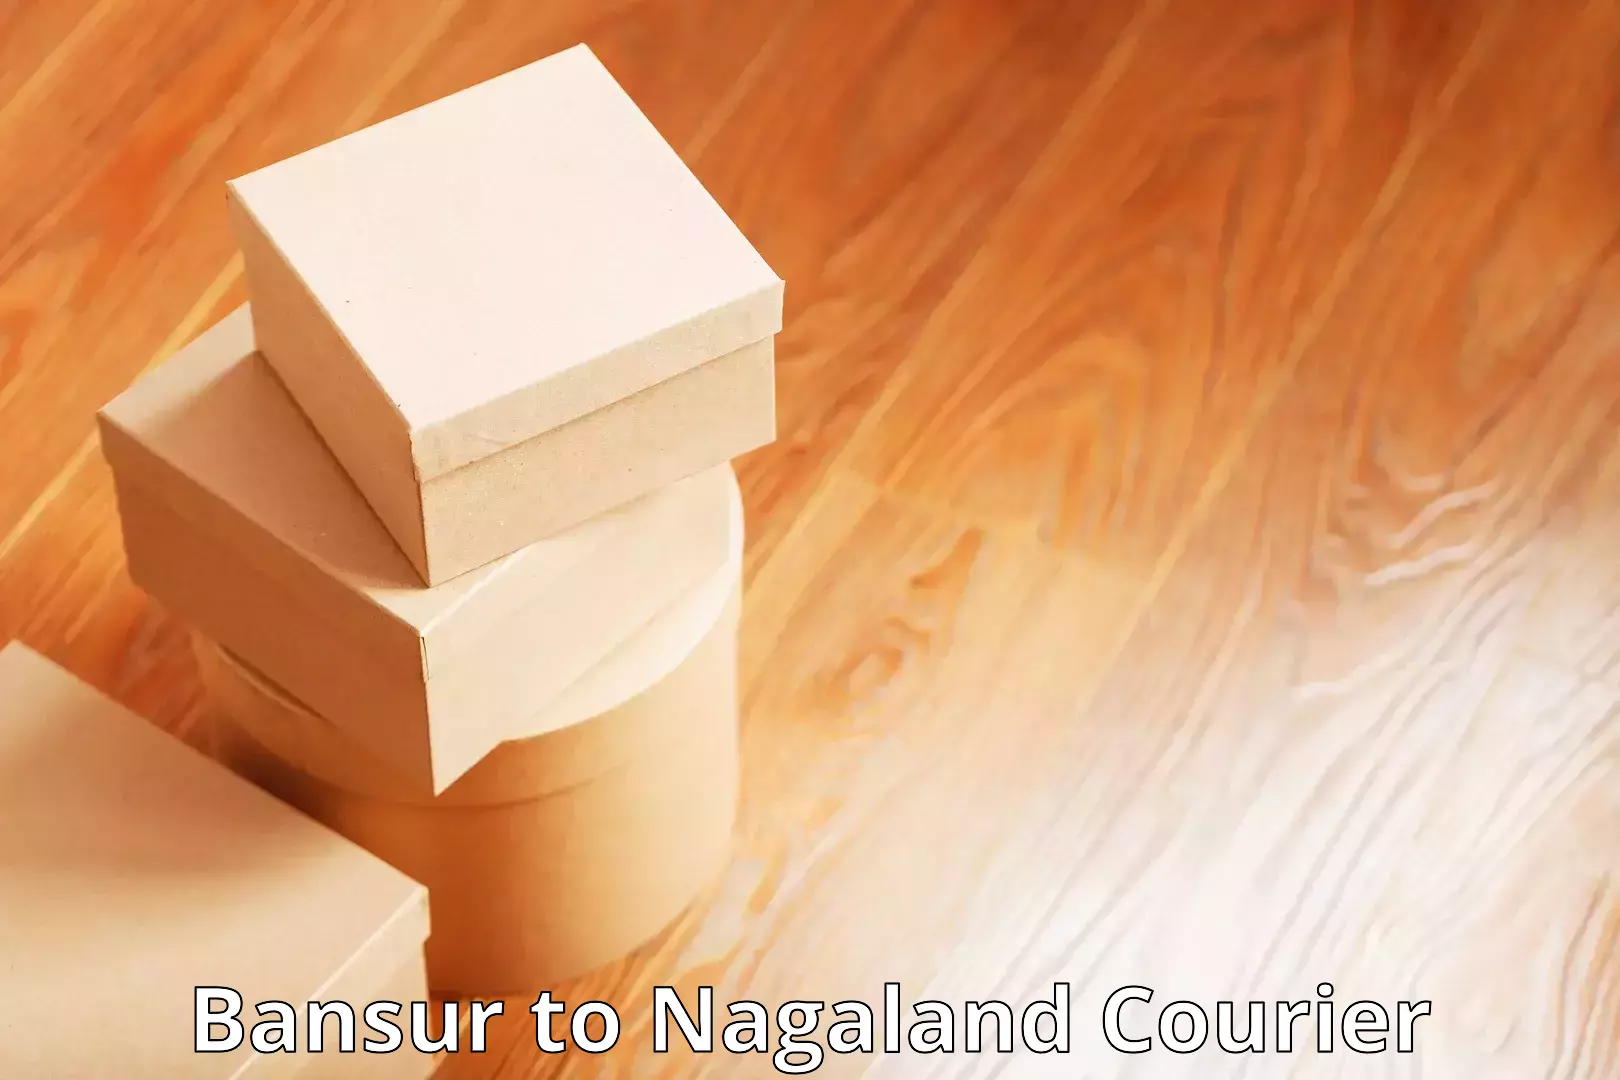 Speedy delivery service Bansur to Nagaland